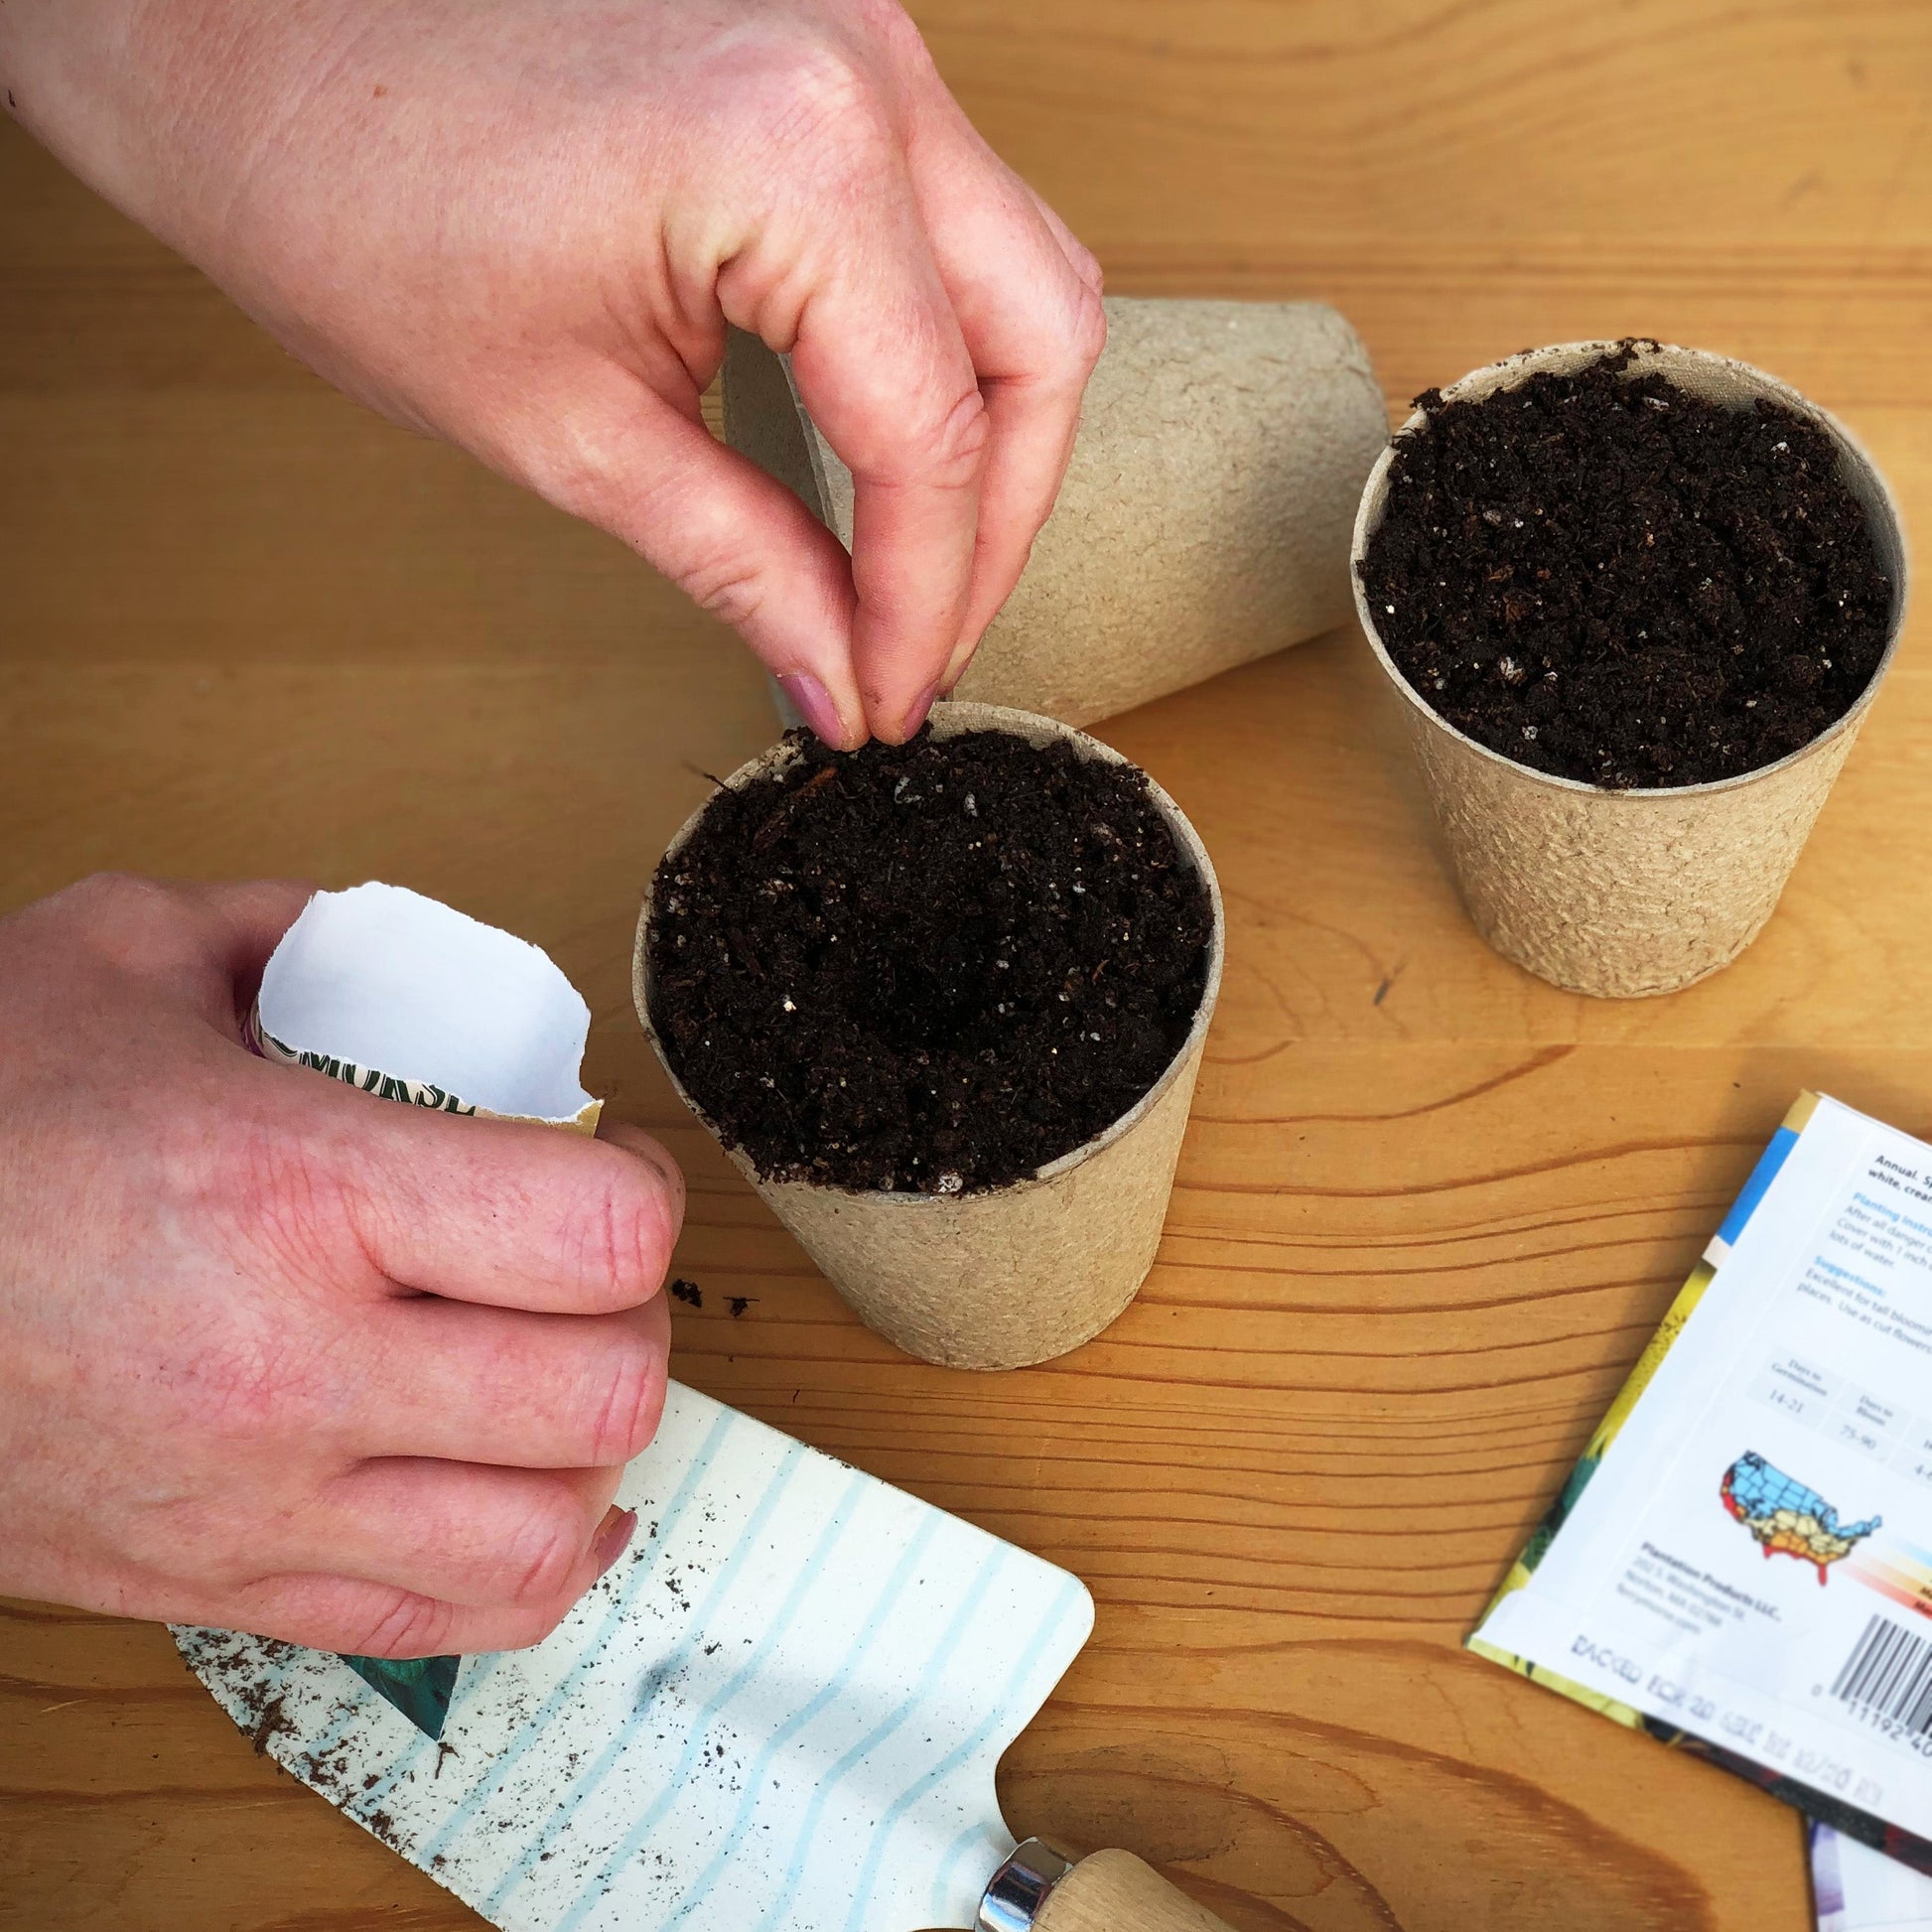 Sowing Early Golden Acre Cabbage Seeds into Jiffy peat pots filled with seed starting mix.